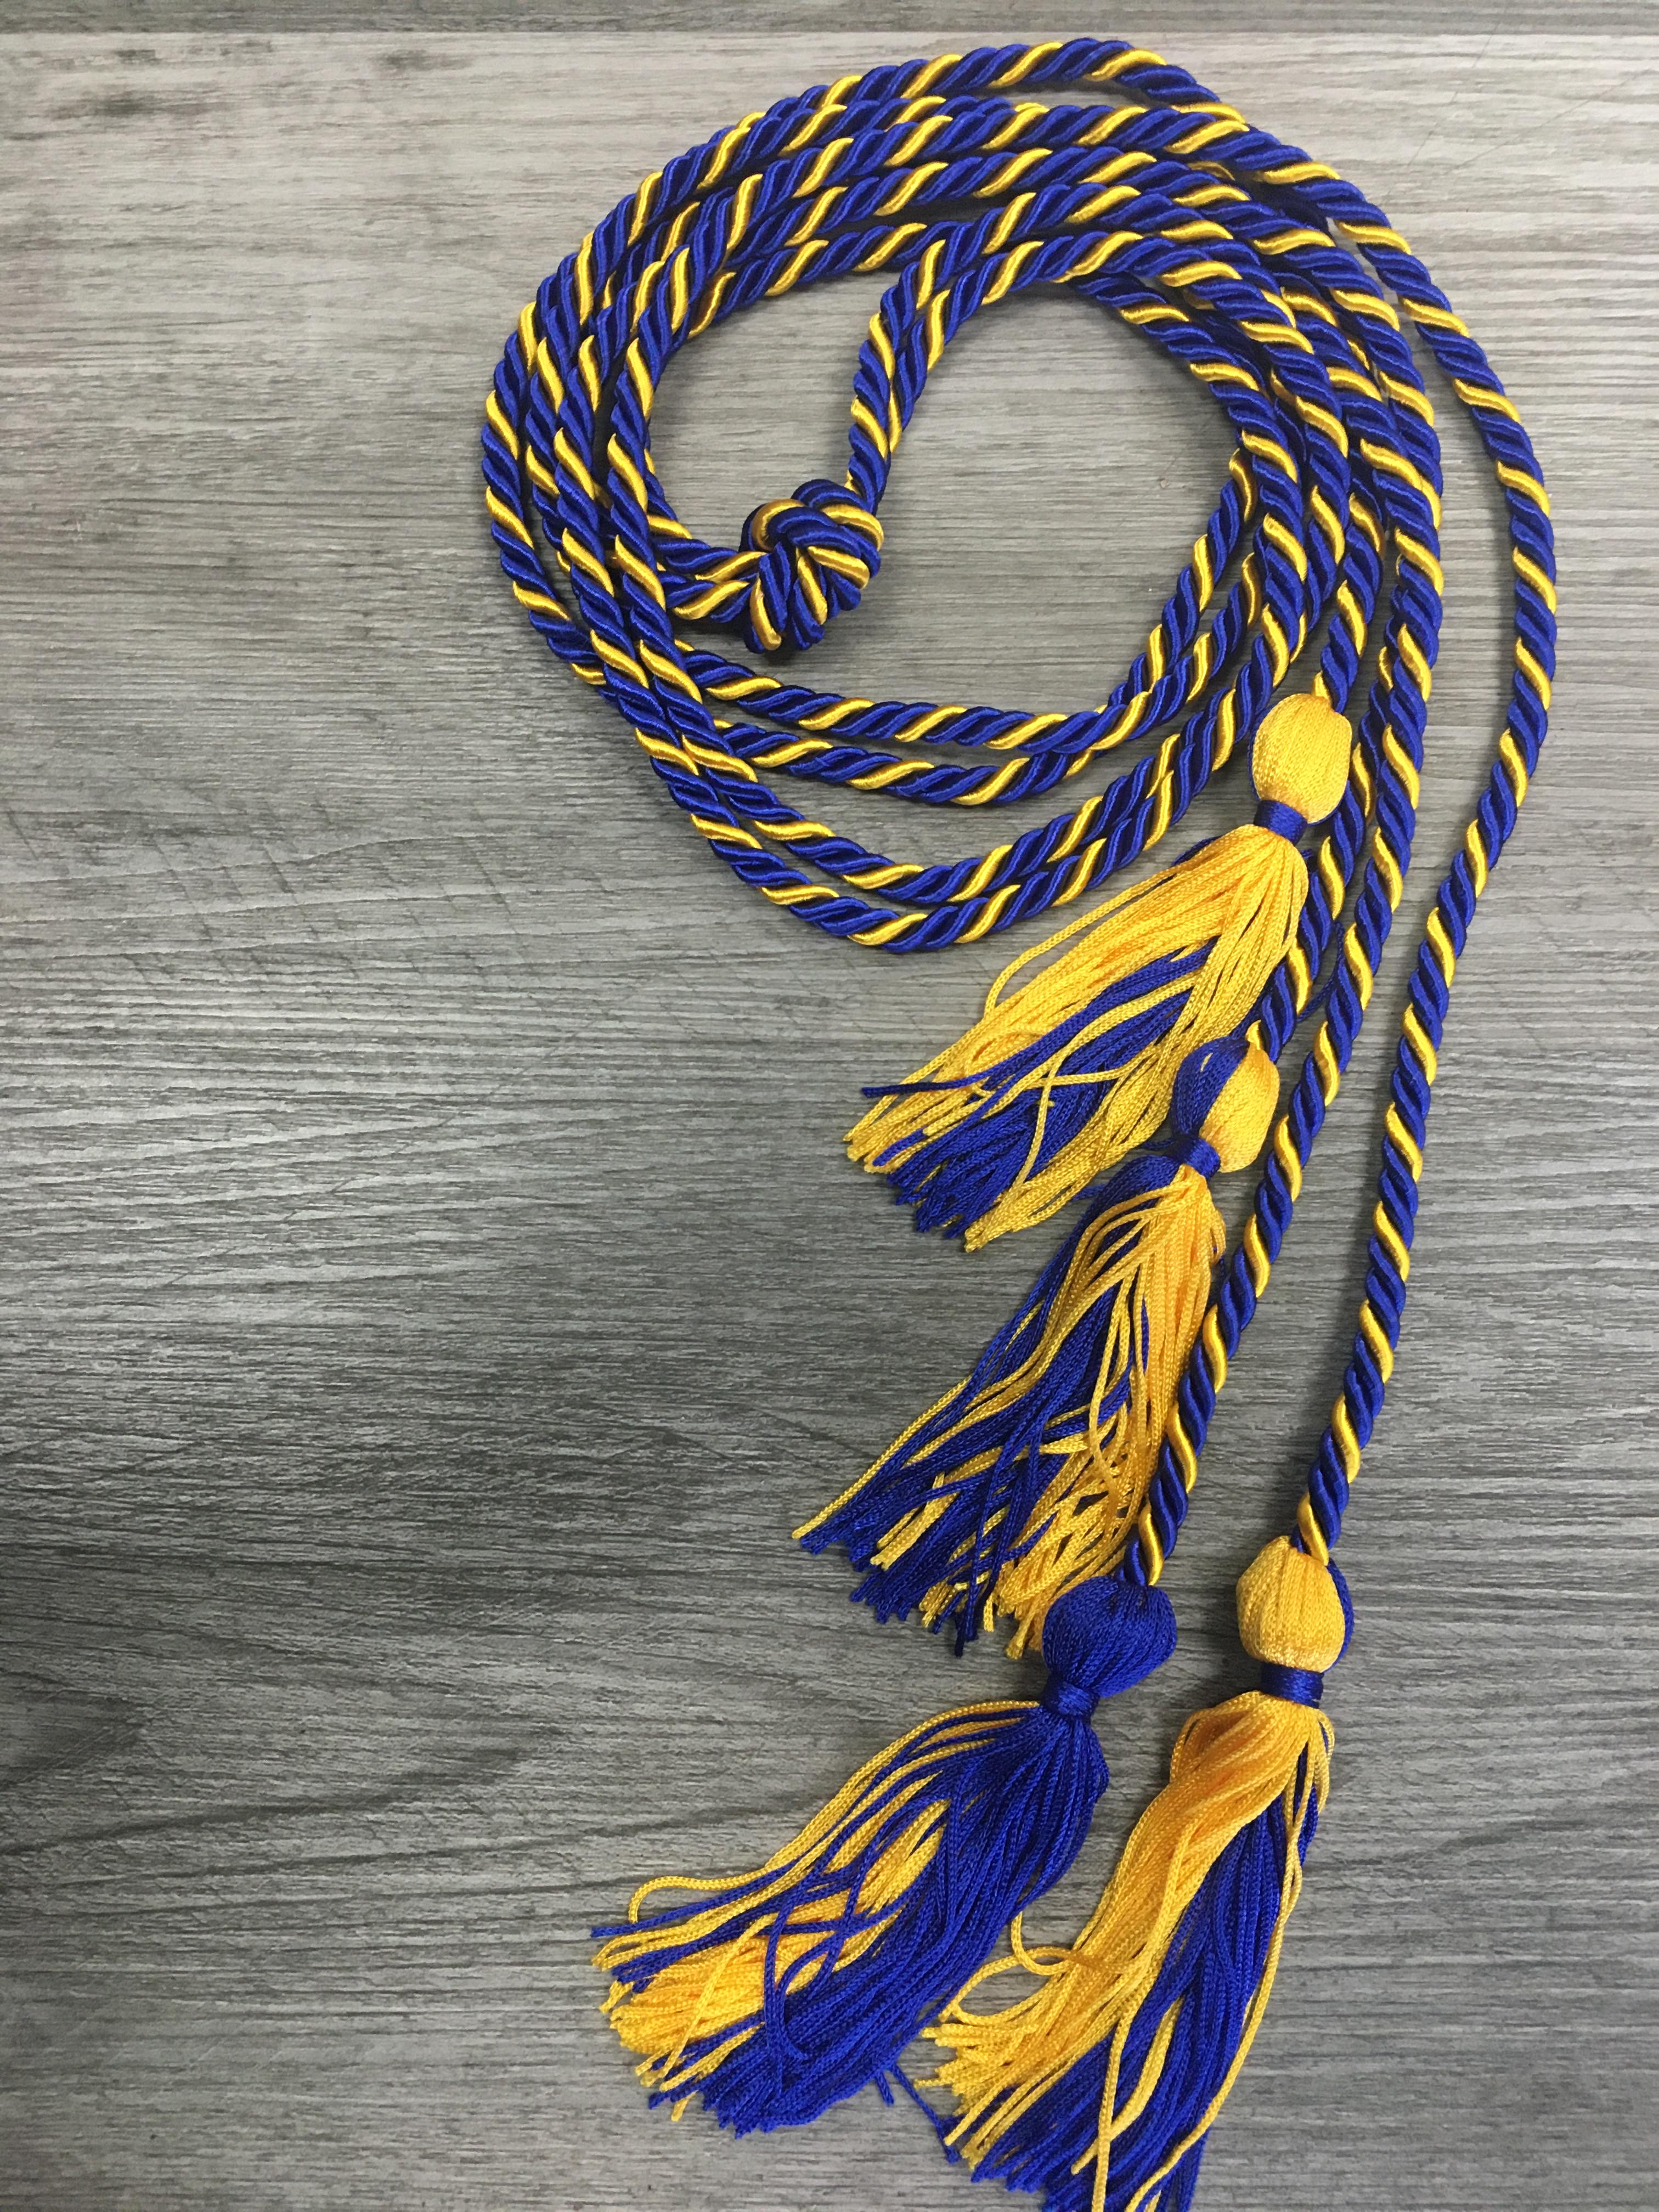 Blue and Gold Intertwined Cords